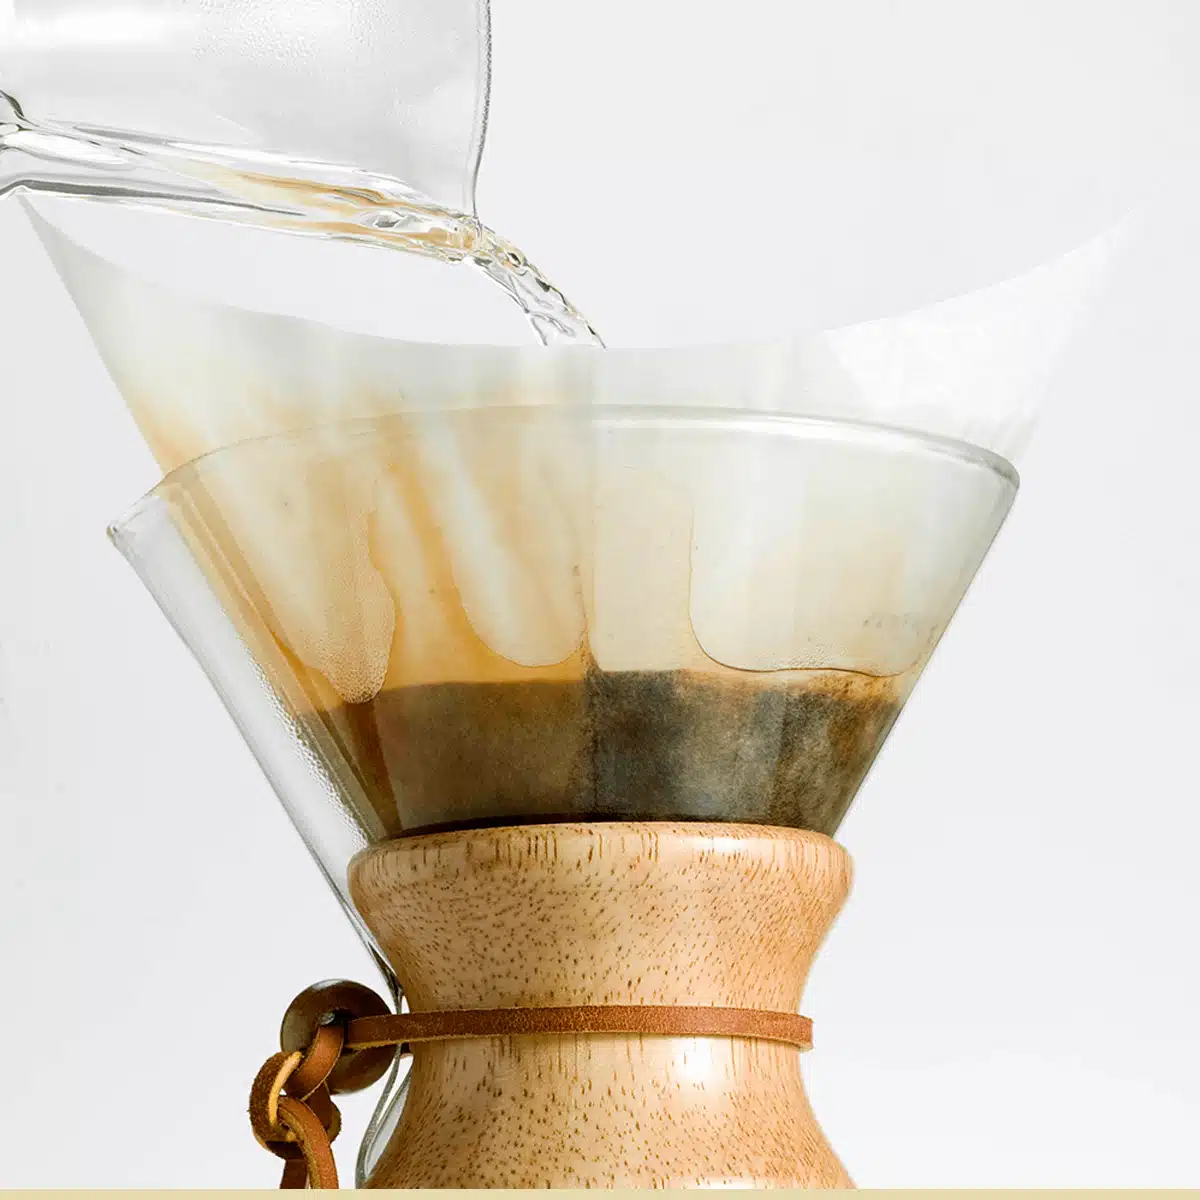 chemex fs-100 filters in use